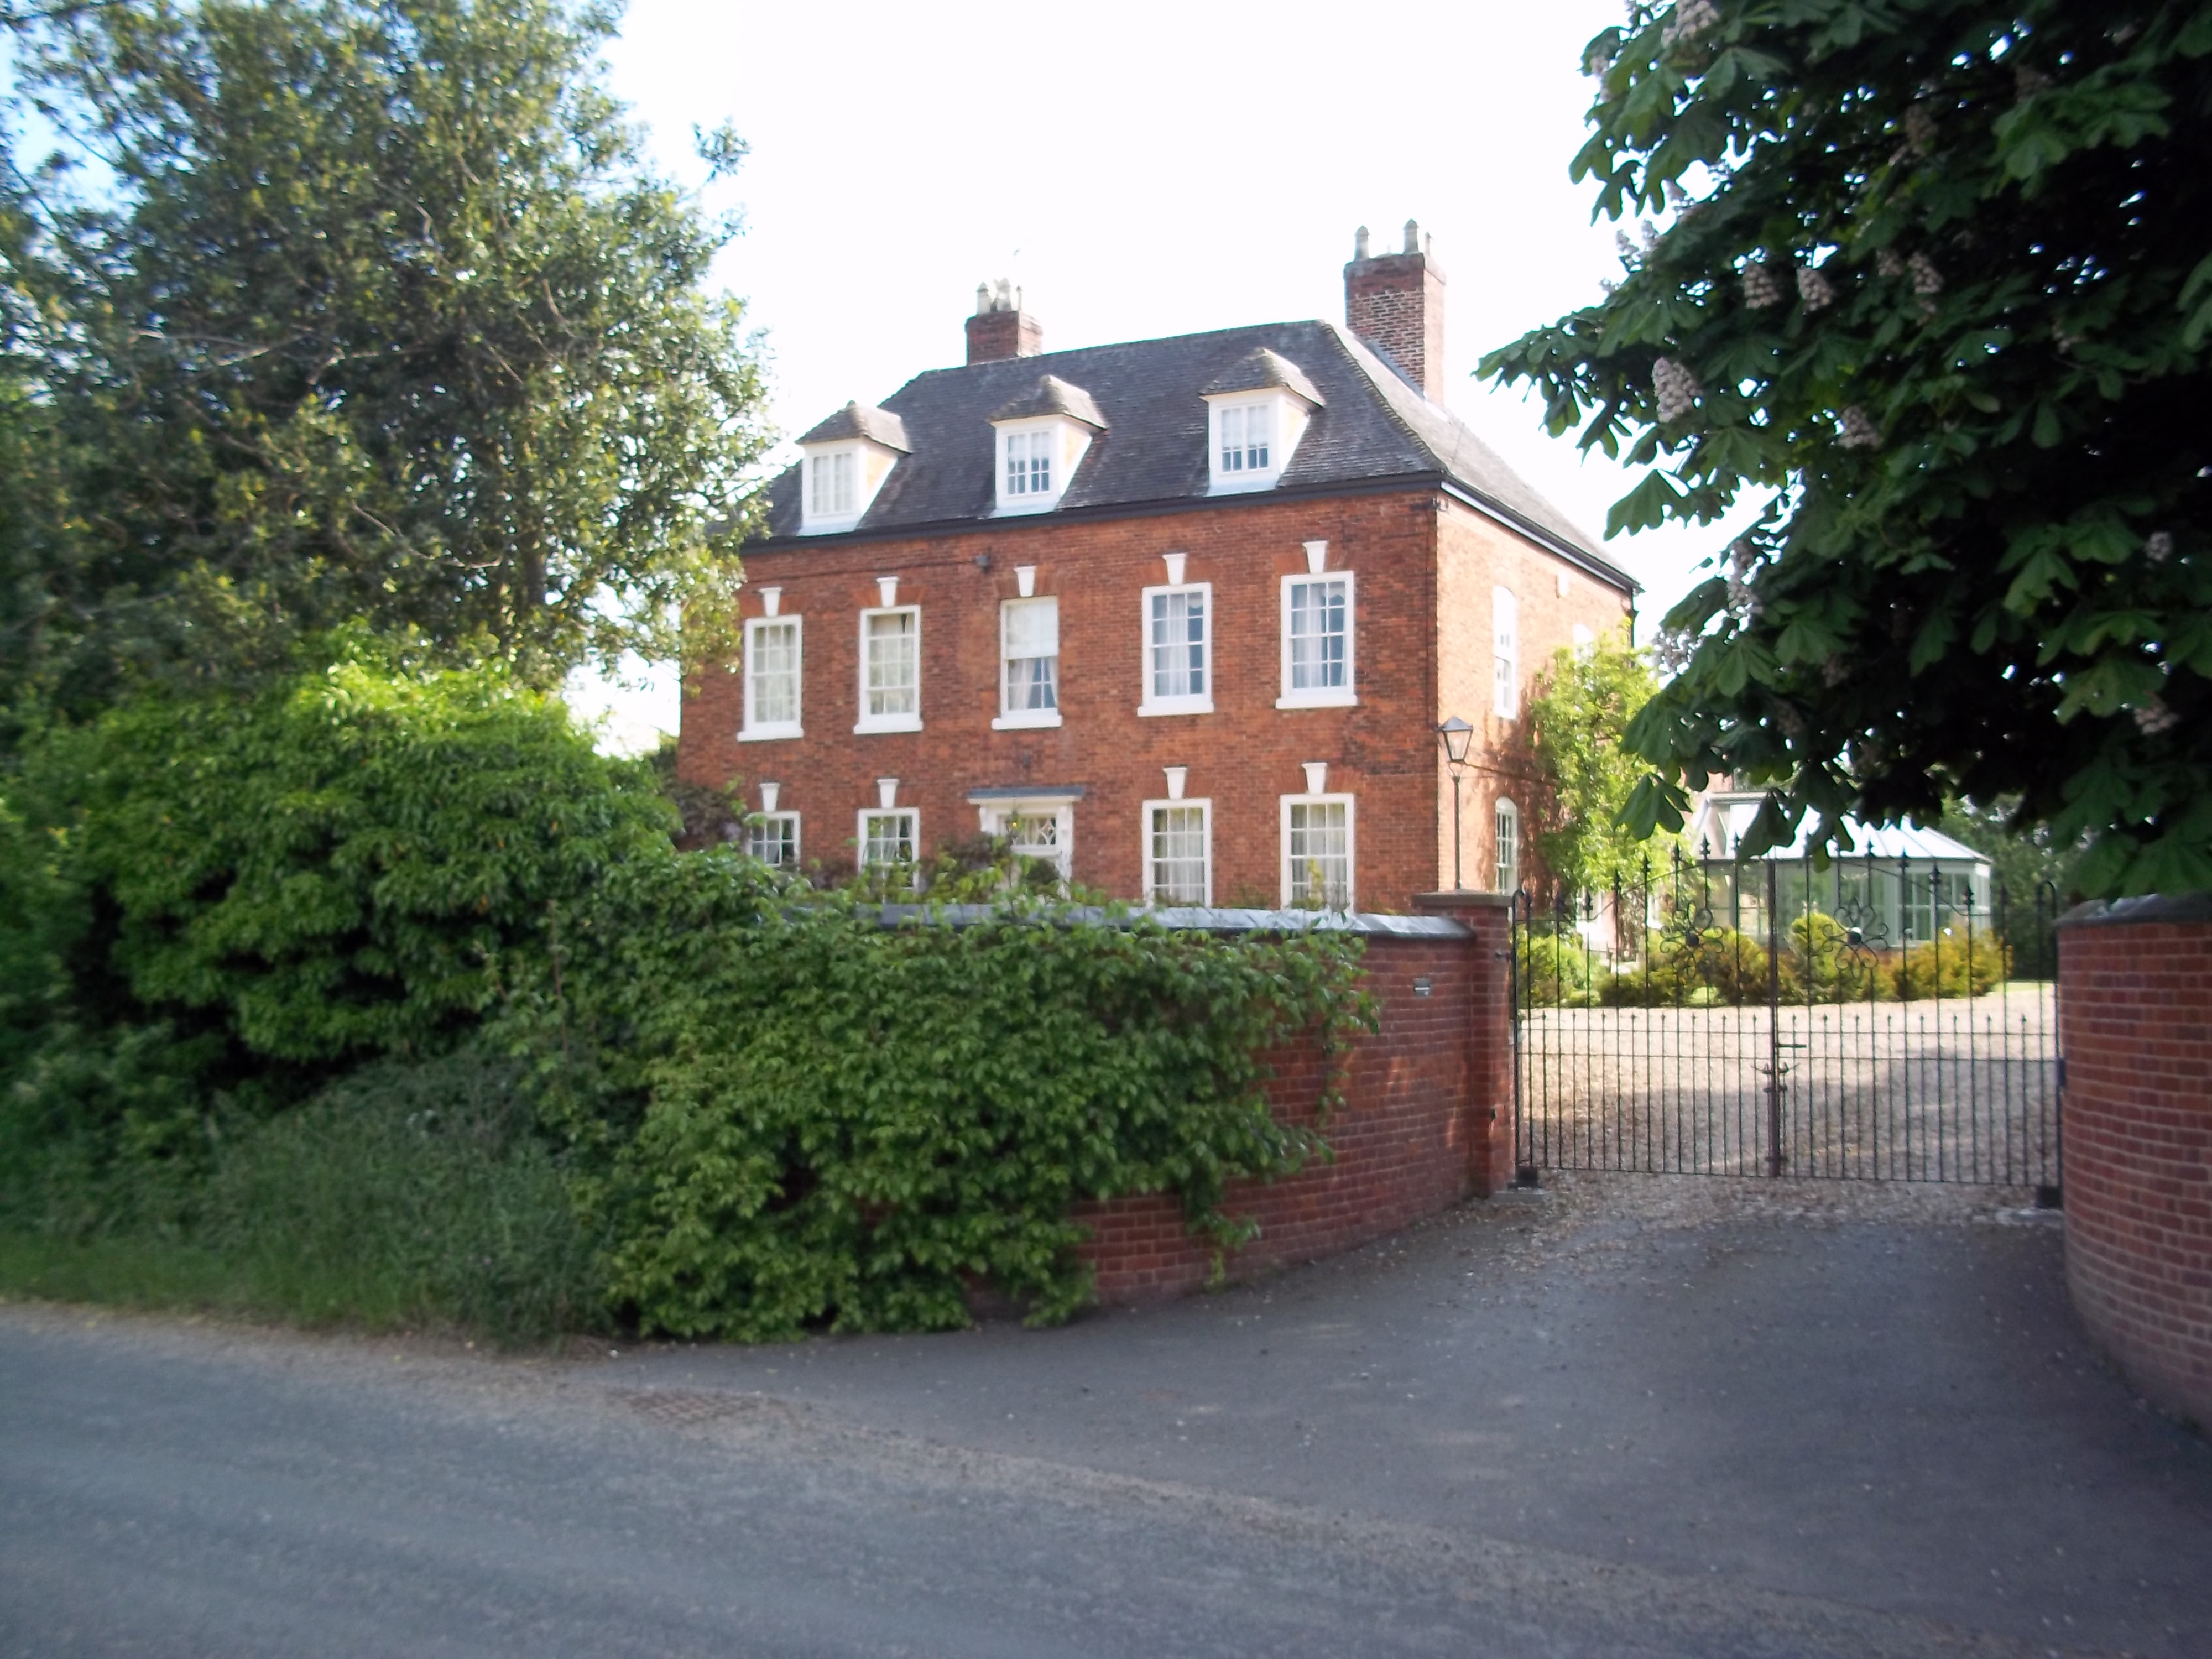 Edward Cooper's rectory at Hamstall Ridware. 2014. 